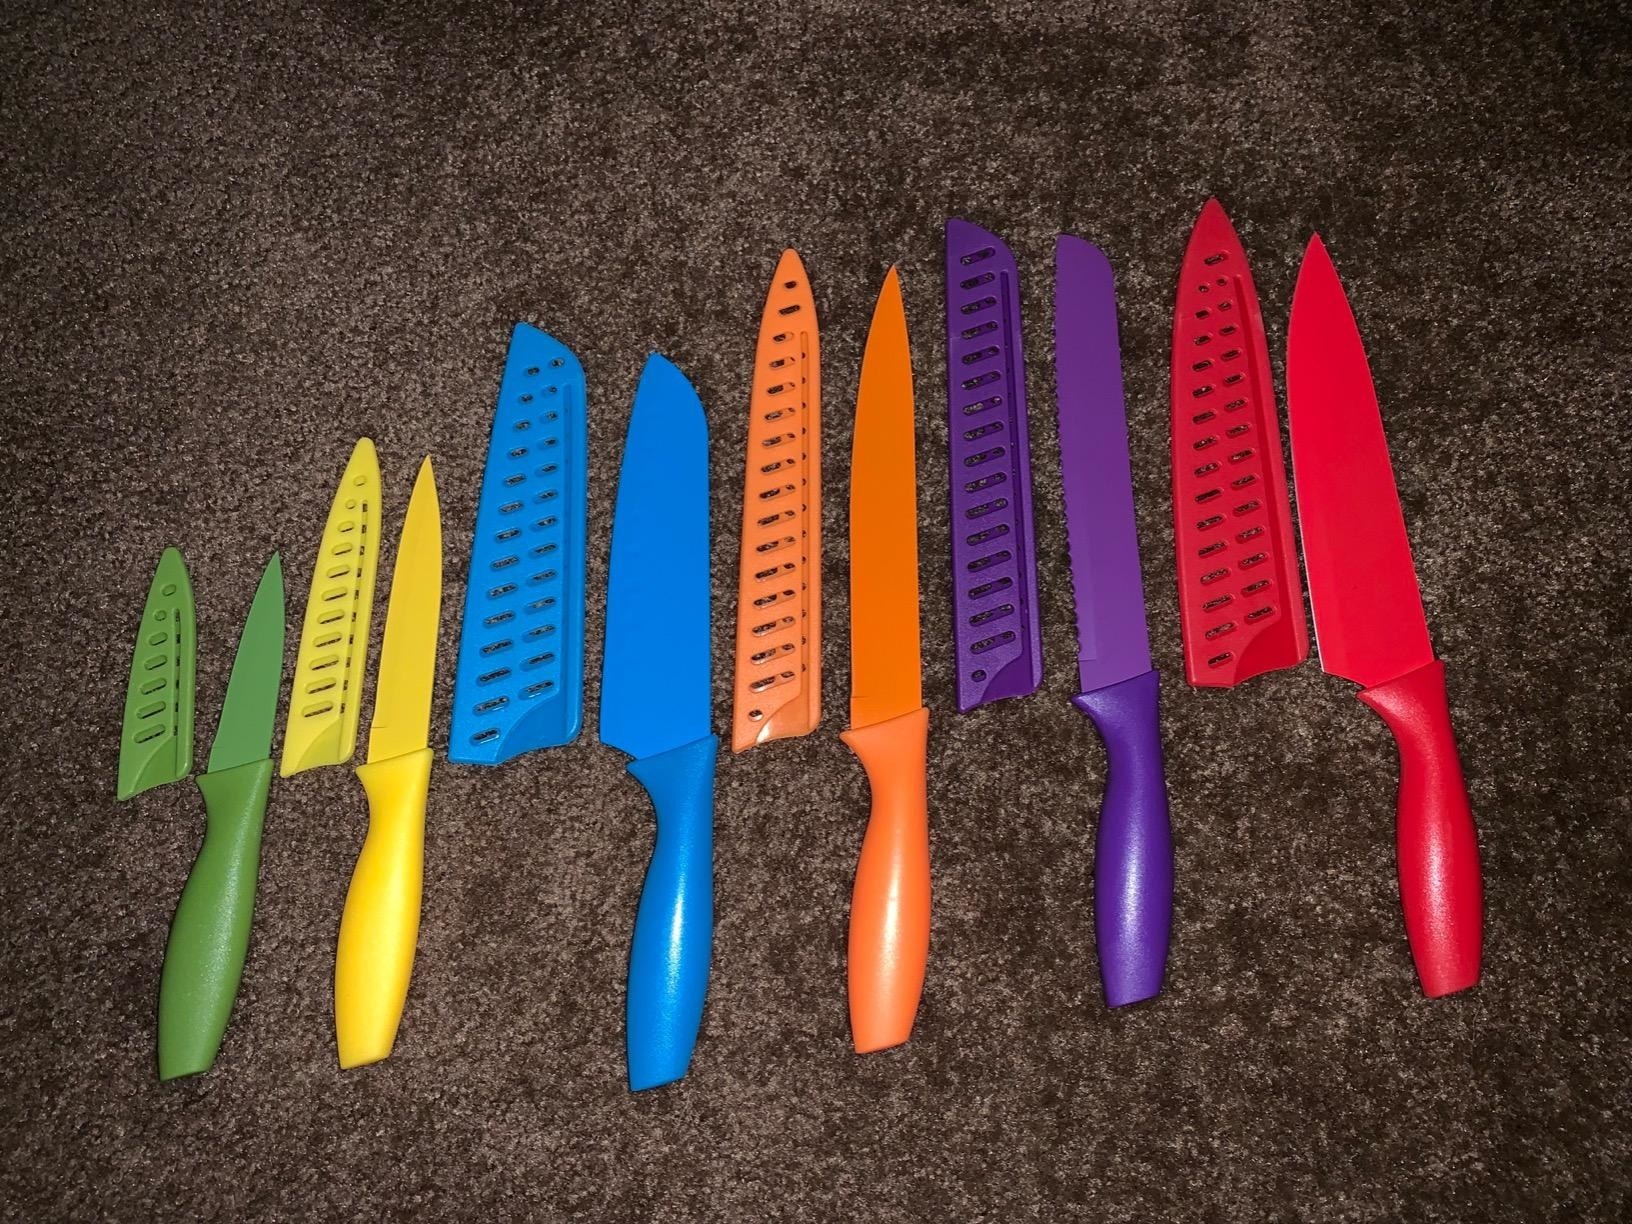 the knife set with green, yellow, blue, orange, purple, and red colored knives and their guards next to them